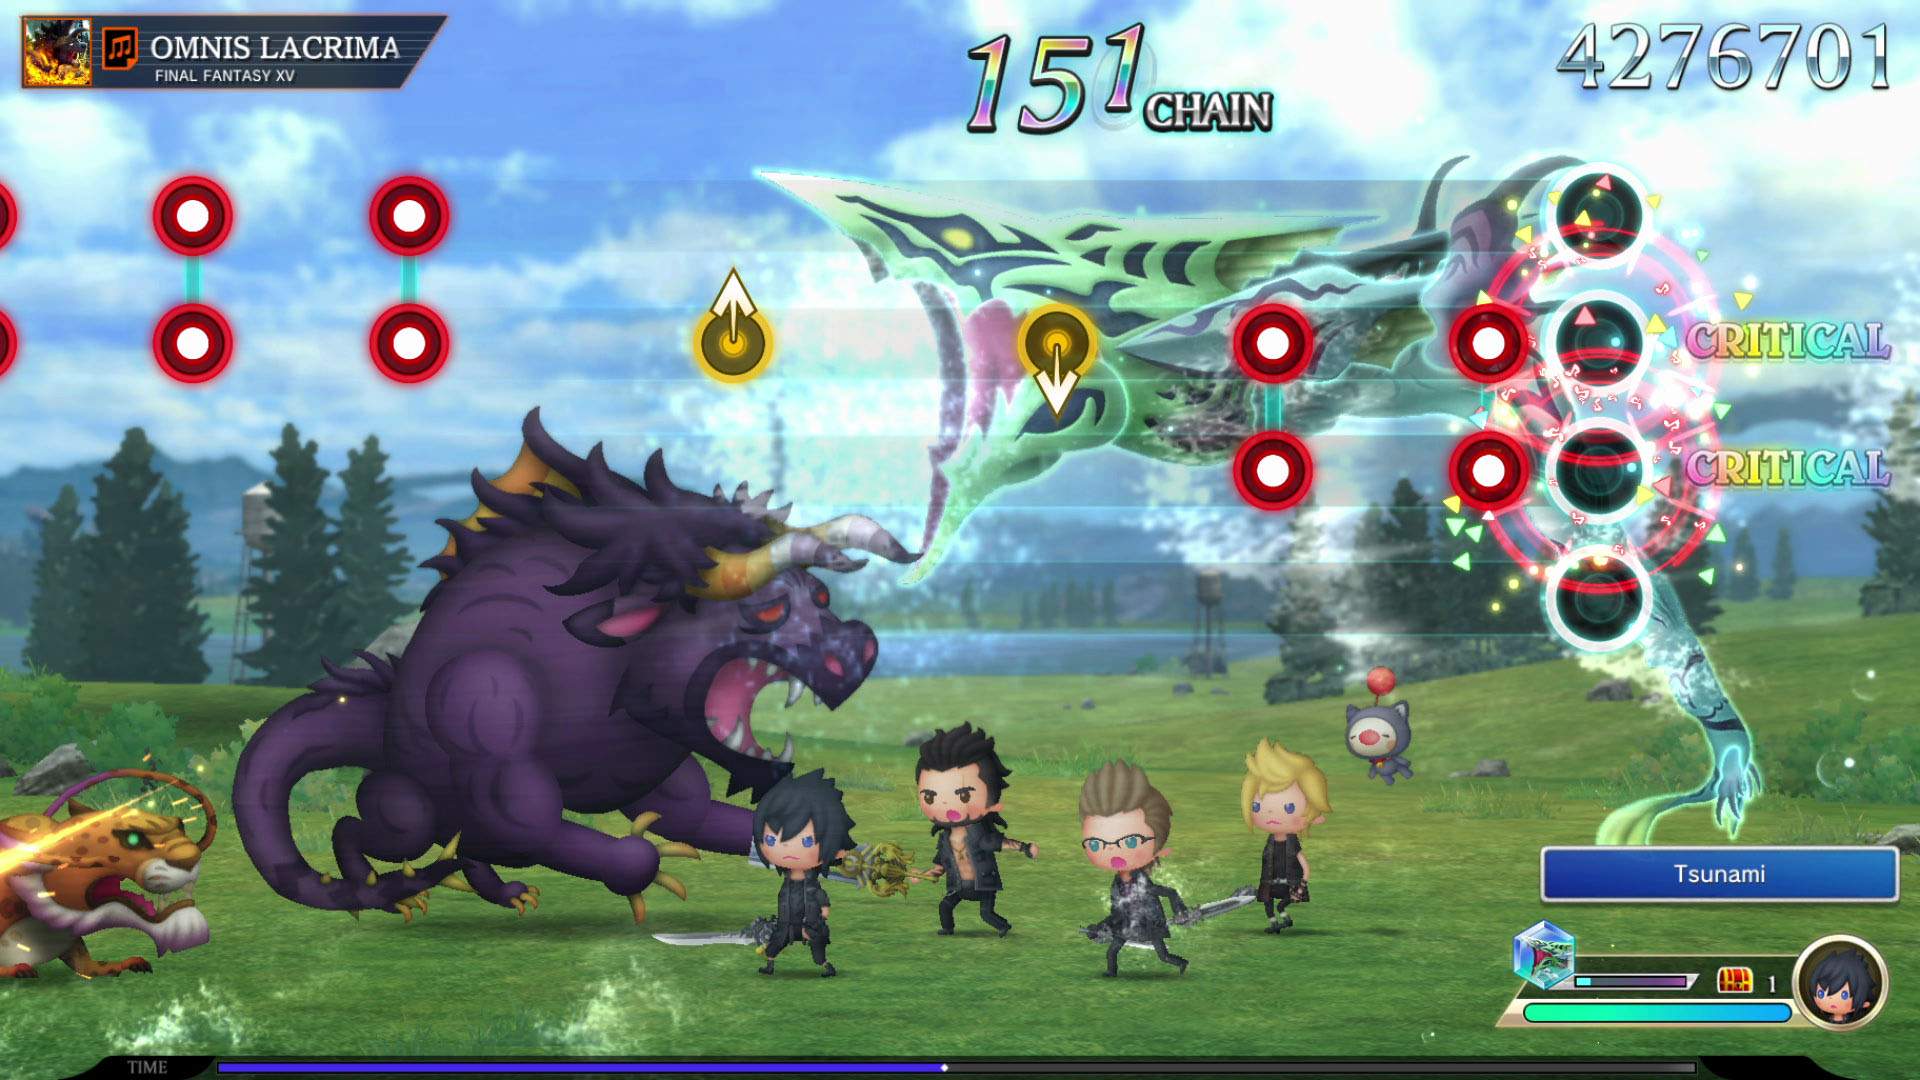 Gameplay screenshot of a multi-player battle with the music of "OMNIS LACRIMA" from FINAL FANTASY 15